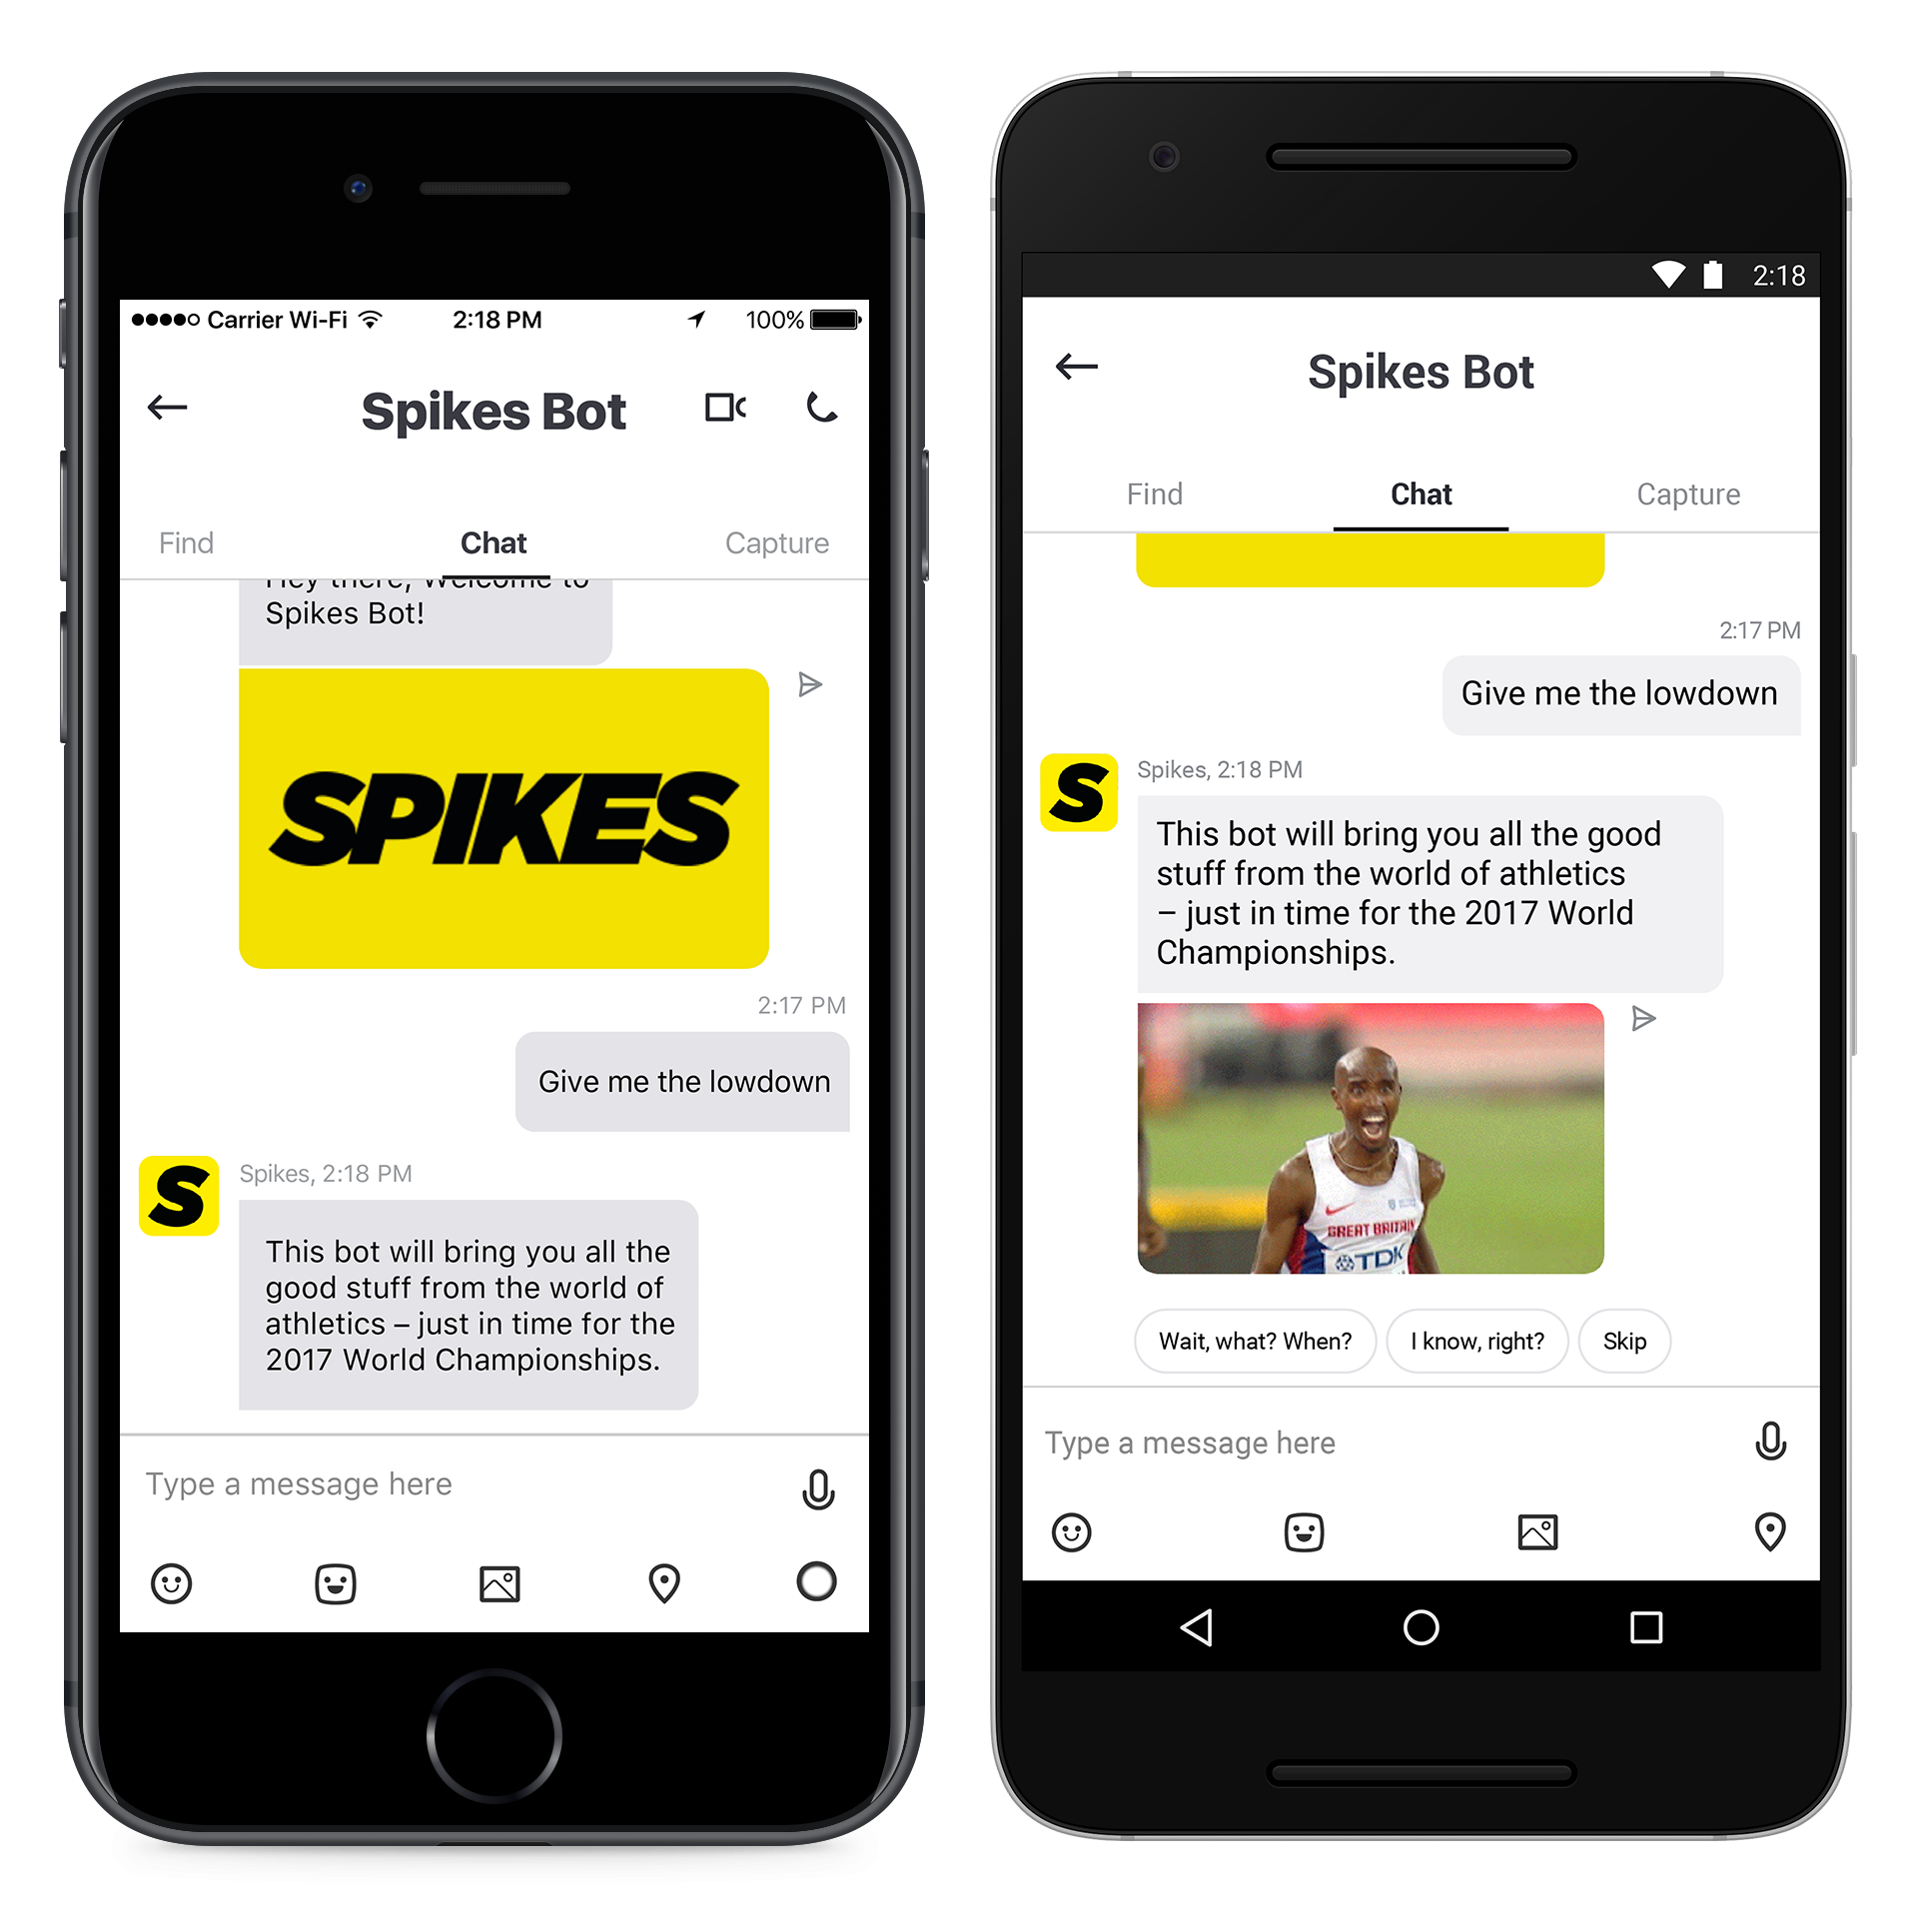 IAAF and Skype launch Spikes Bot before World Championships